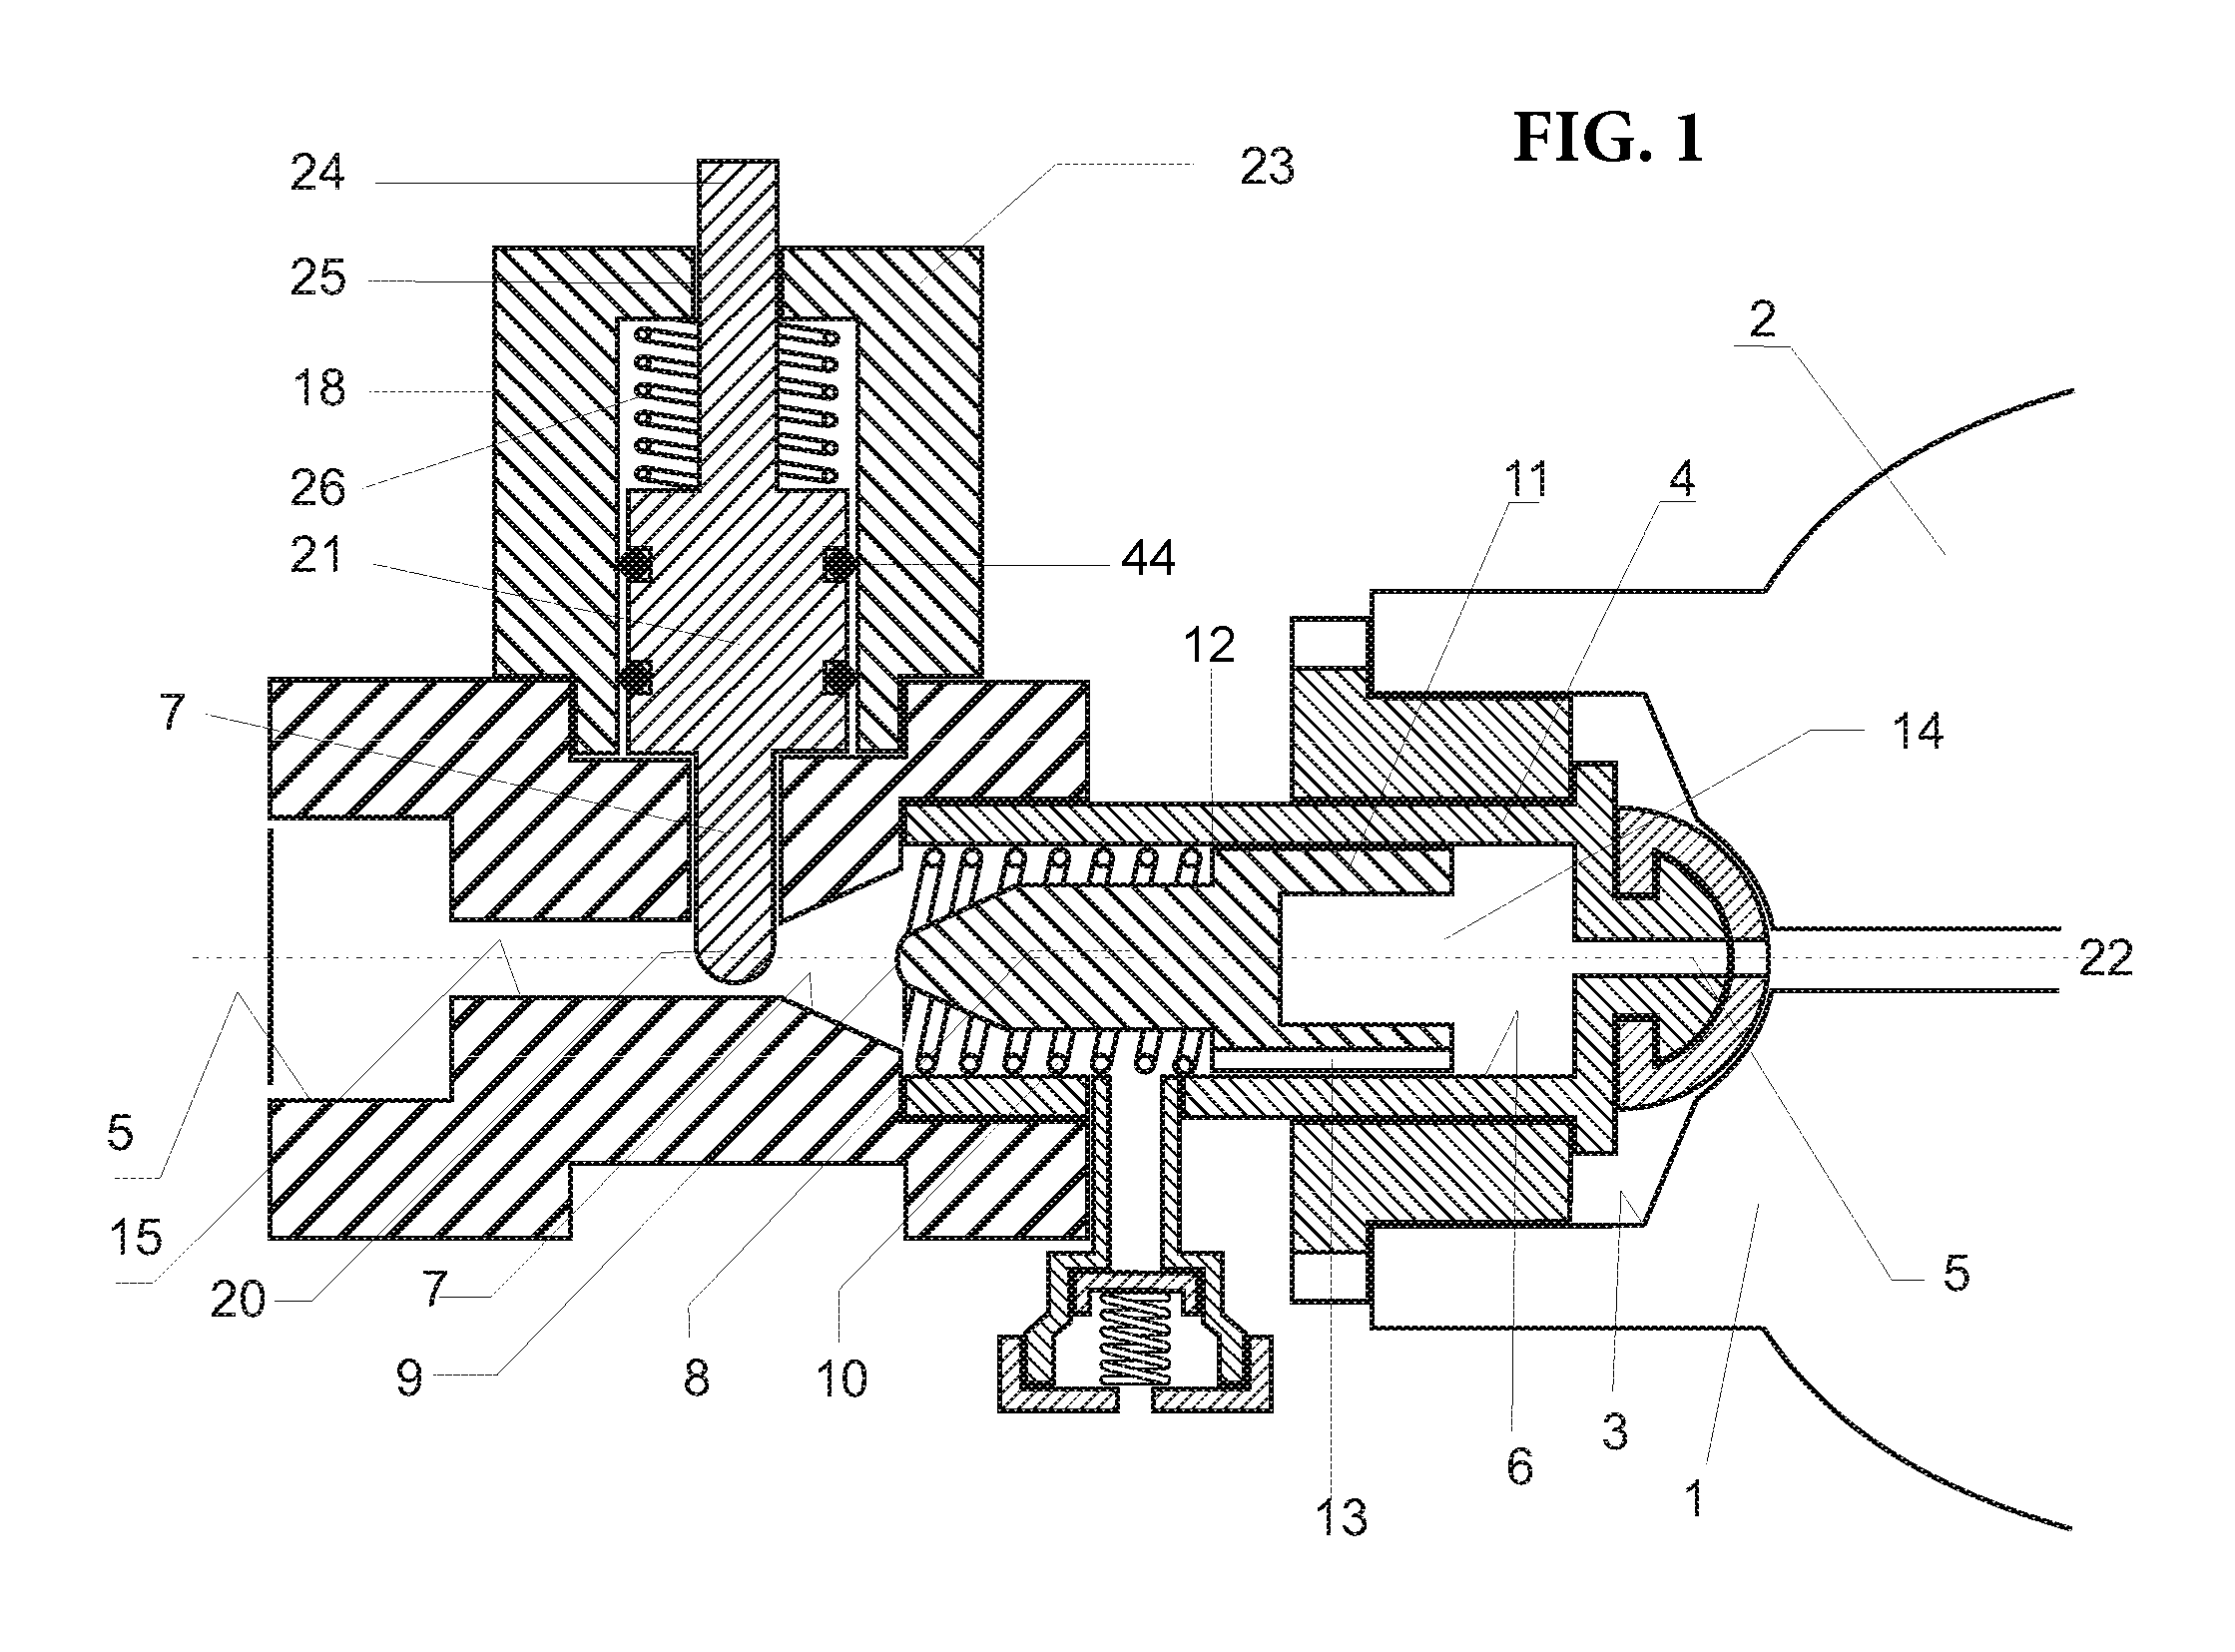 Safety gas valve capable to attain a blocking condition when subjected to a flow in excess of its nominal working conditions